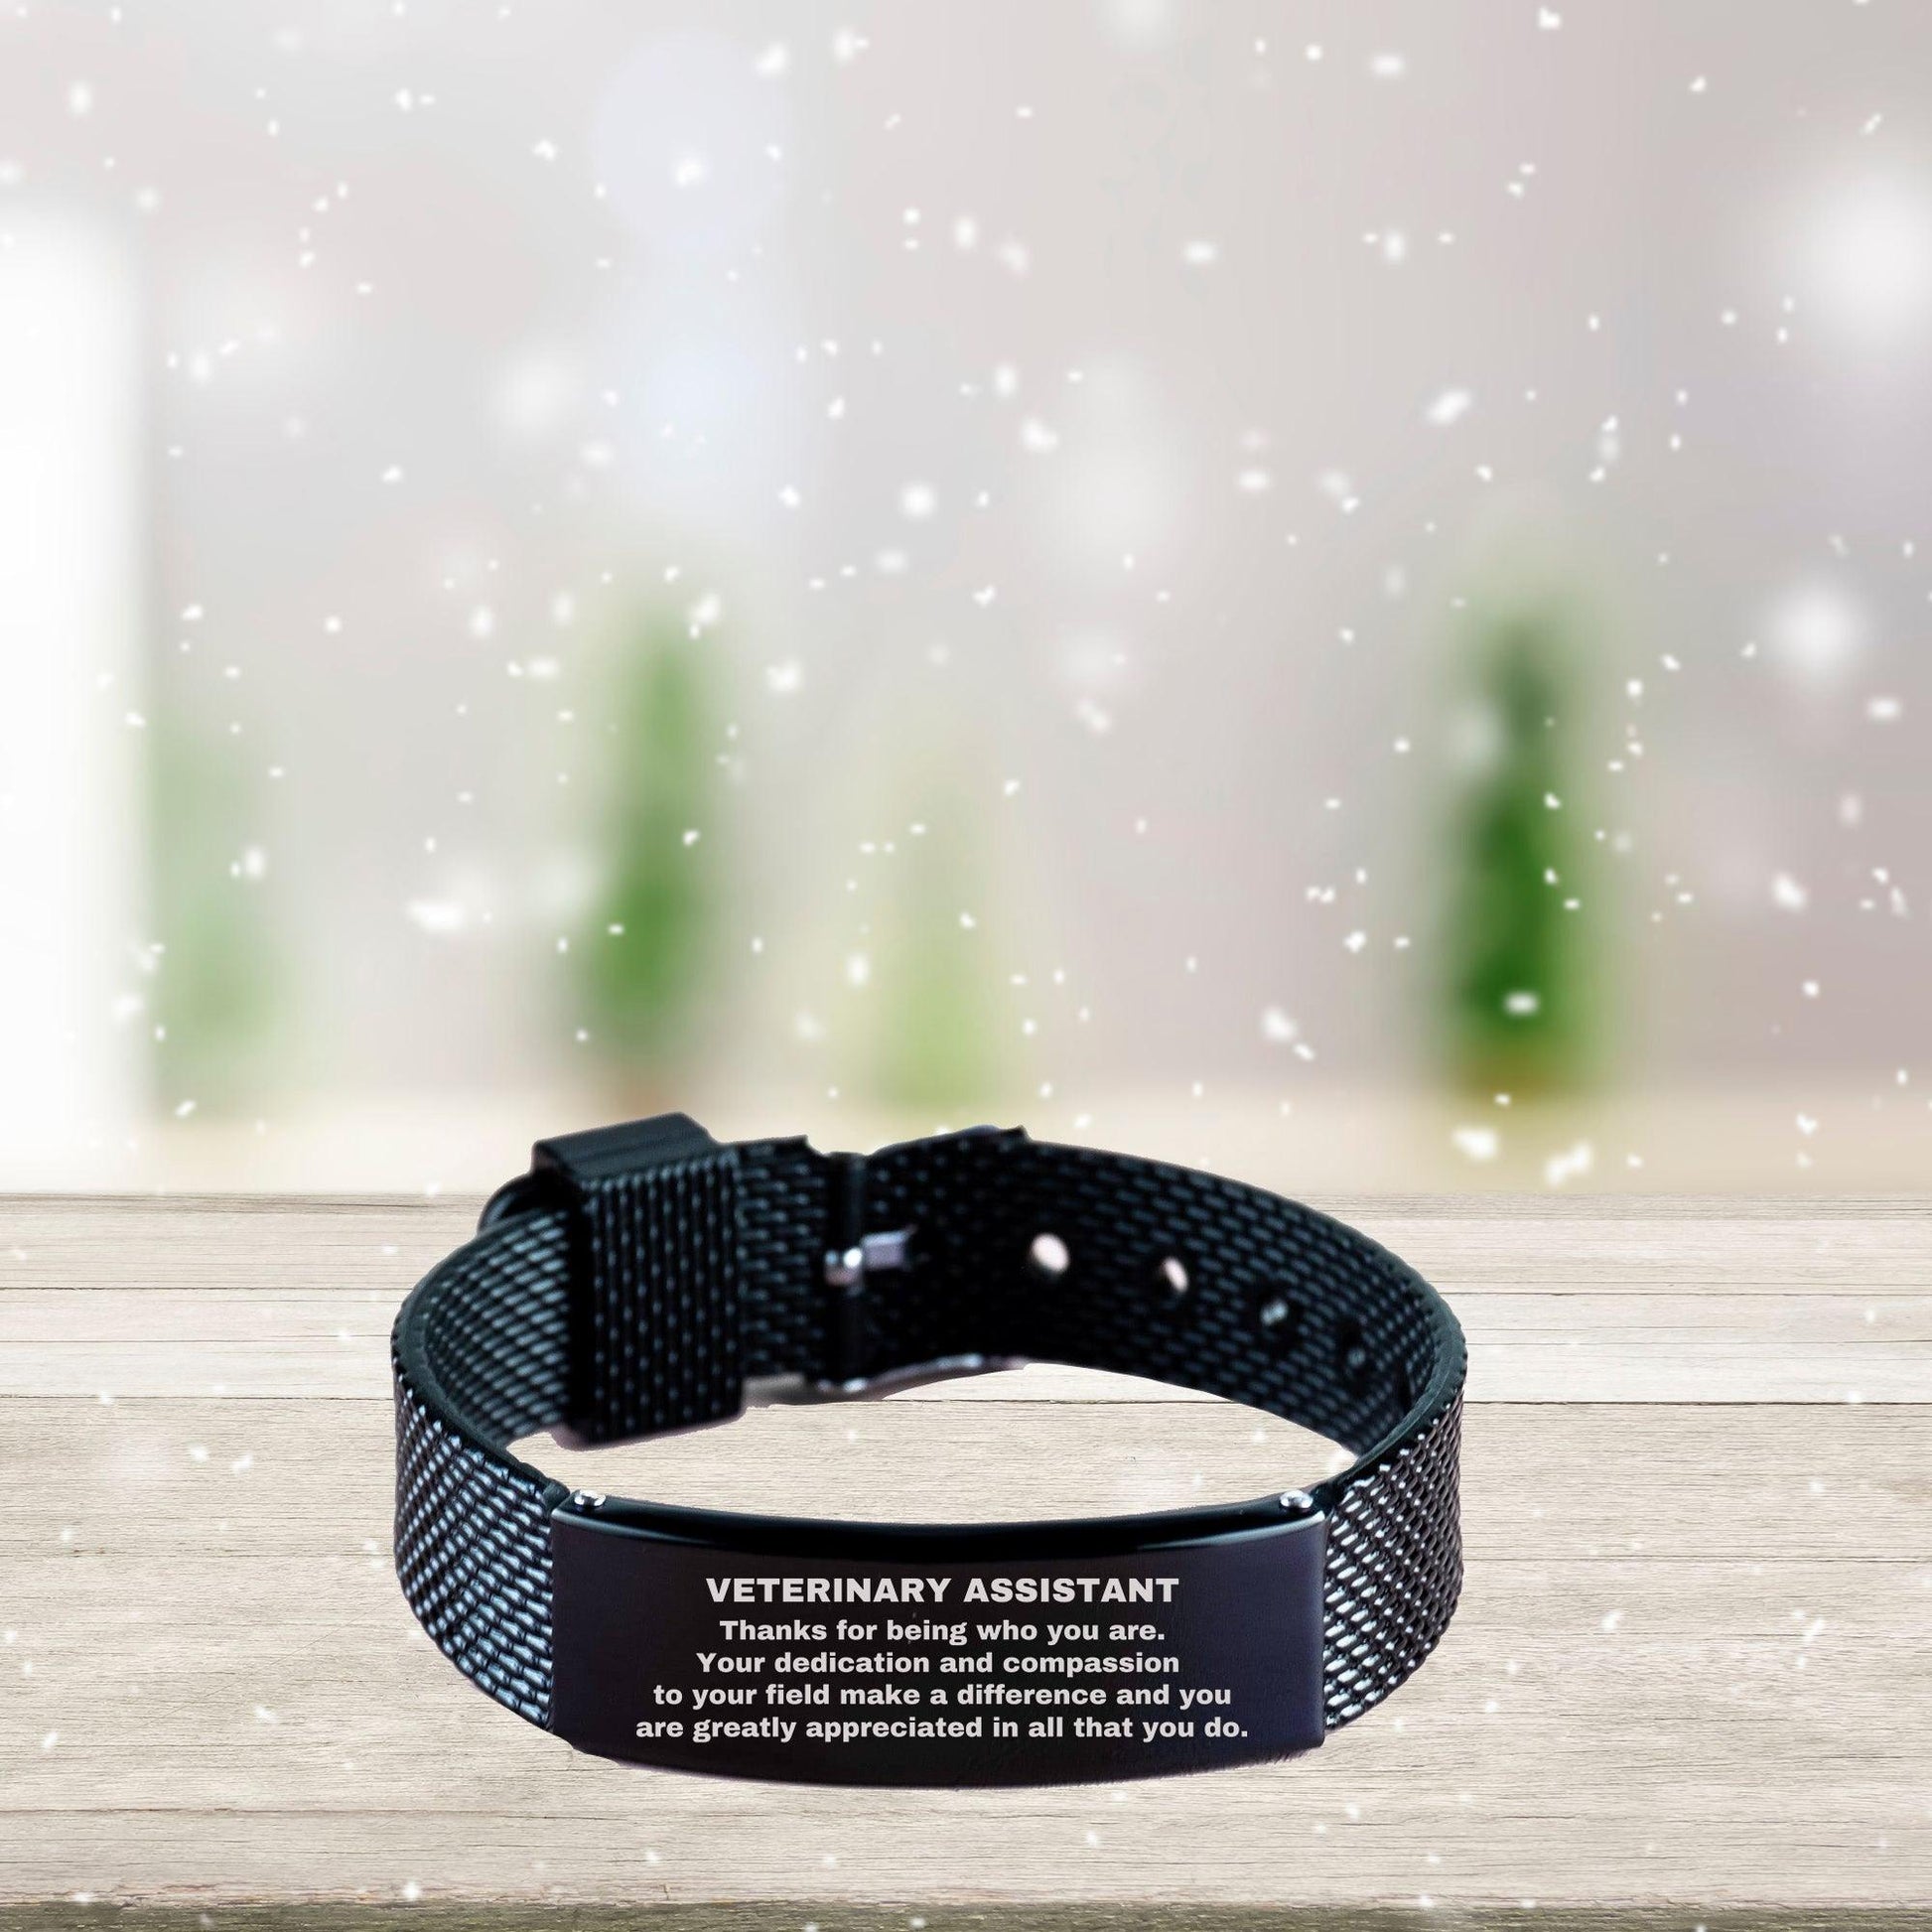 Veterinary Assistant Black Shark Mesh Stainless Steel Engraved Bracelet - Thanks for being who you are - Birthday Christmas Jewelry Gifts Coworkers Colleague Boss - Mallard Moon Gift Shop